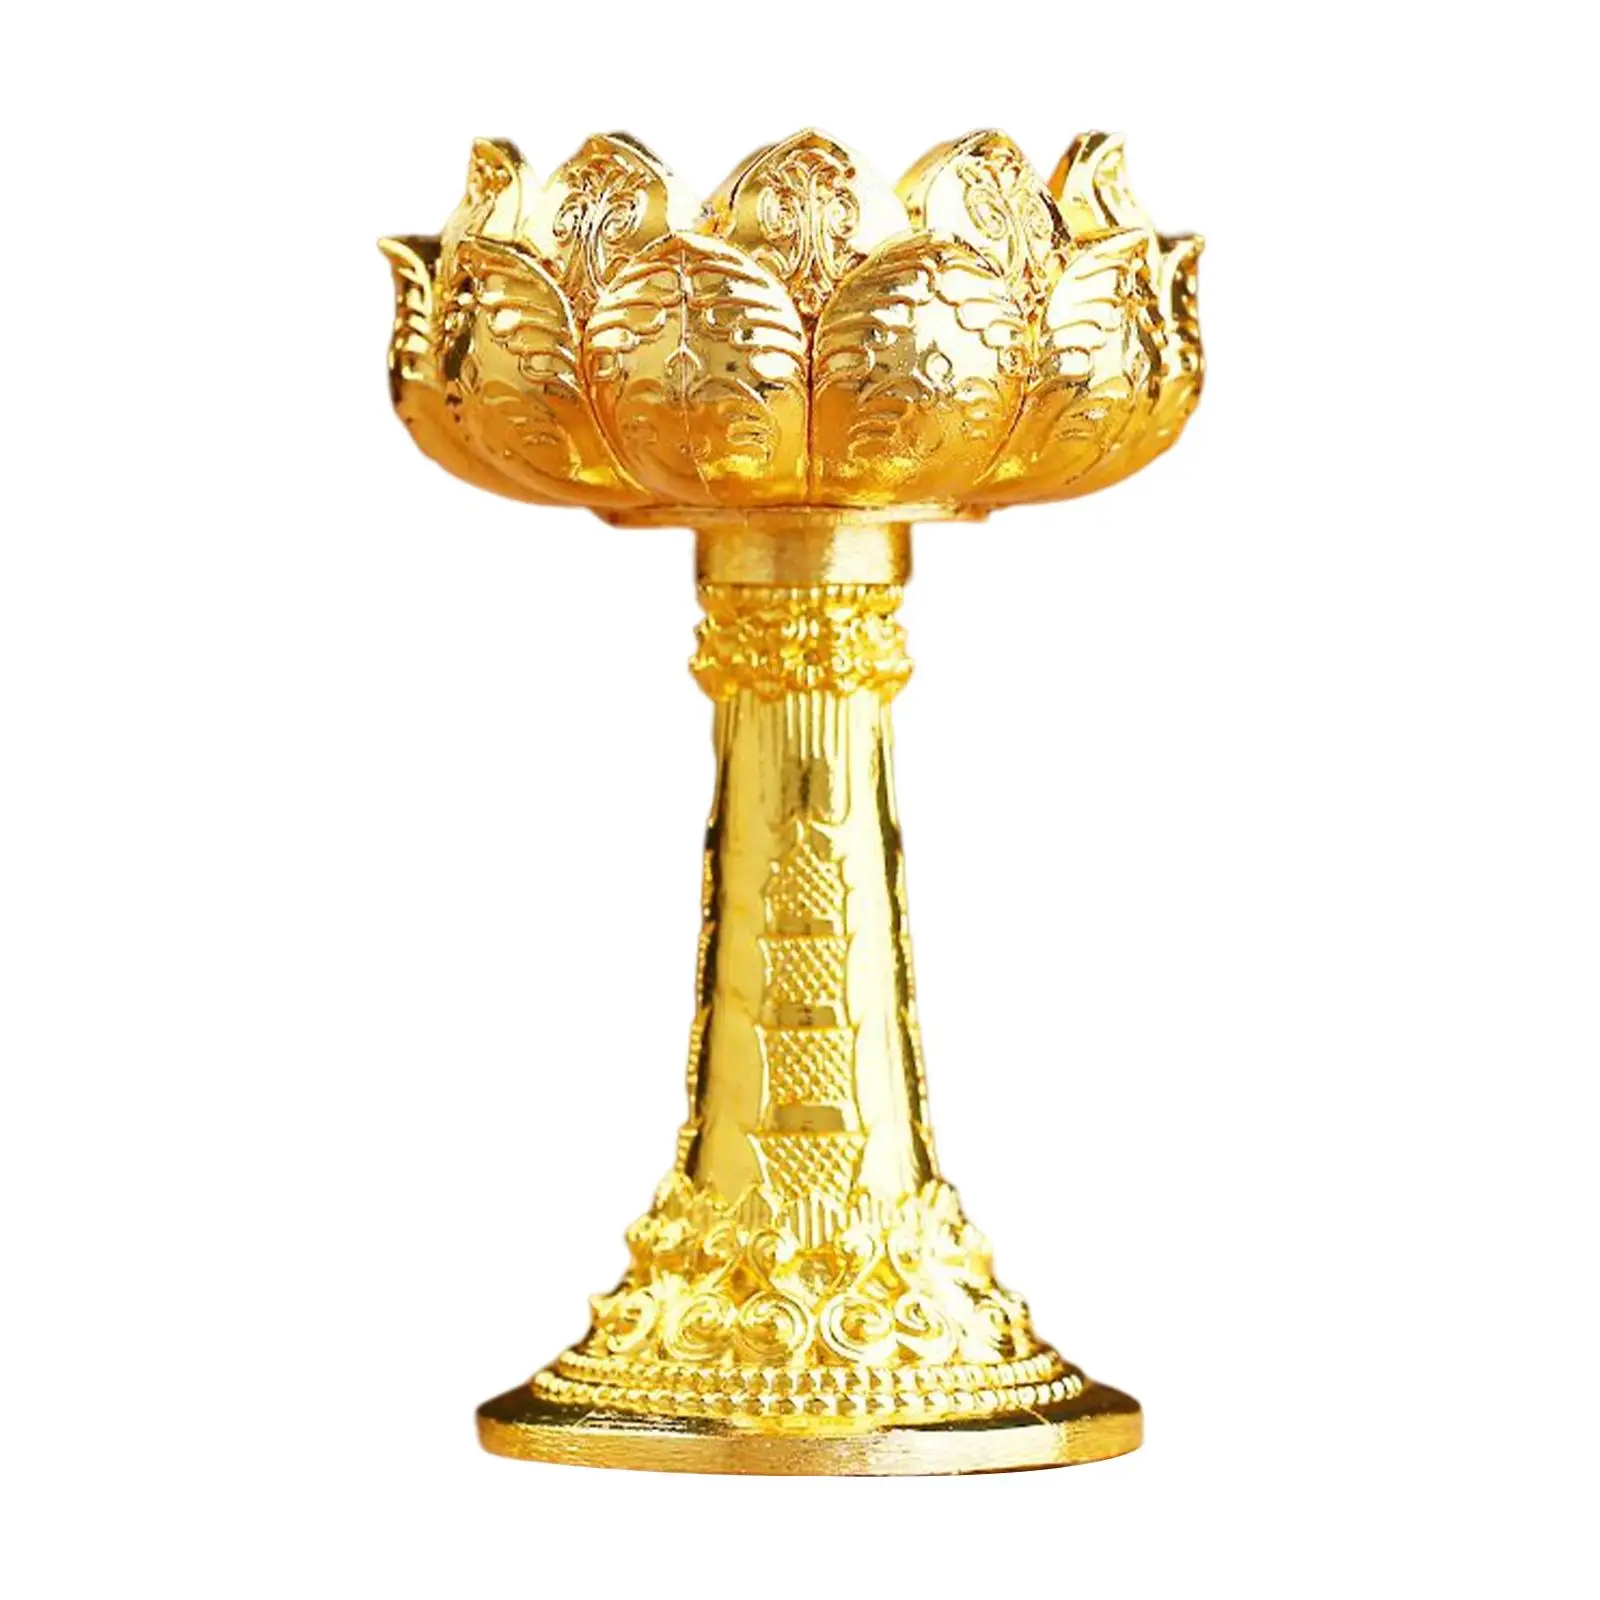 Ghee Lamp Holder Candle Holder Buddhist Candlestick Tibetan Butter Lamp Holder for Home Table Centerpiece Decoration Ornament